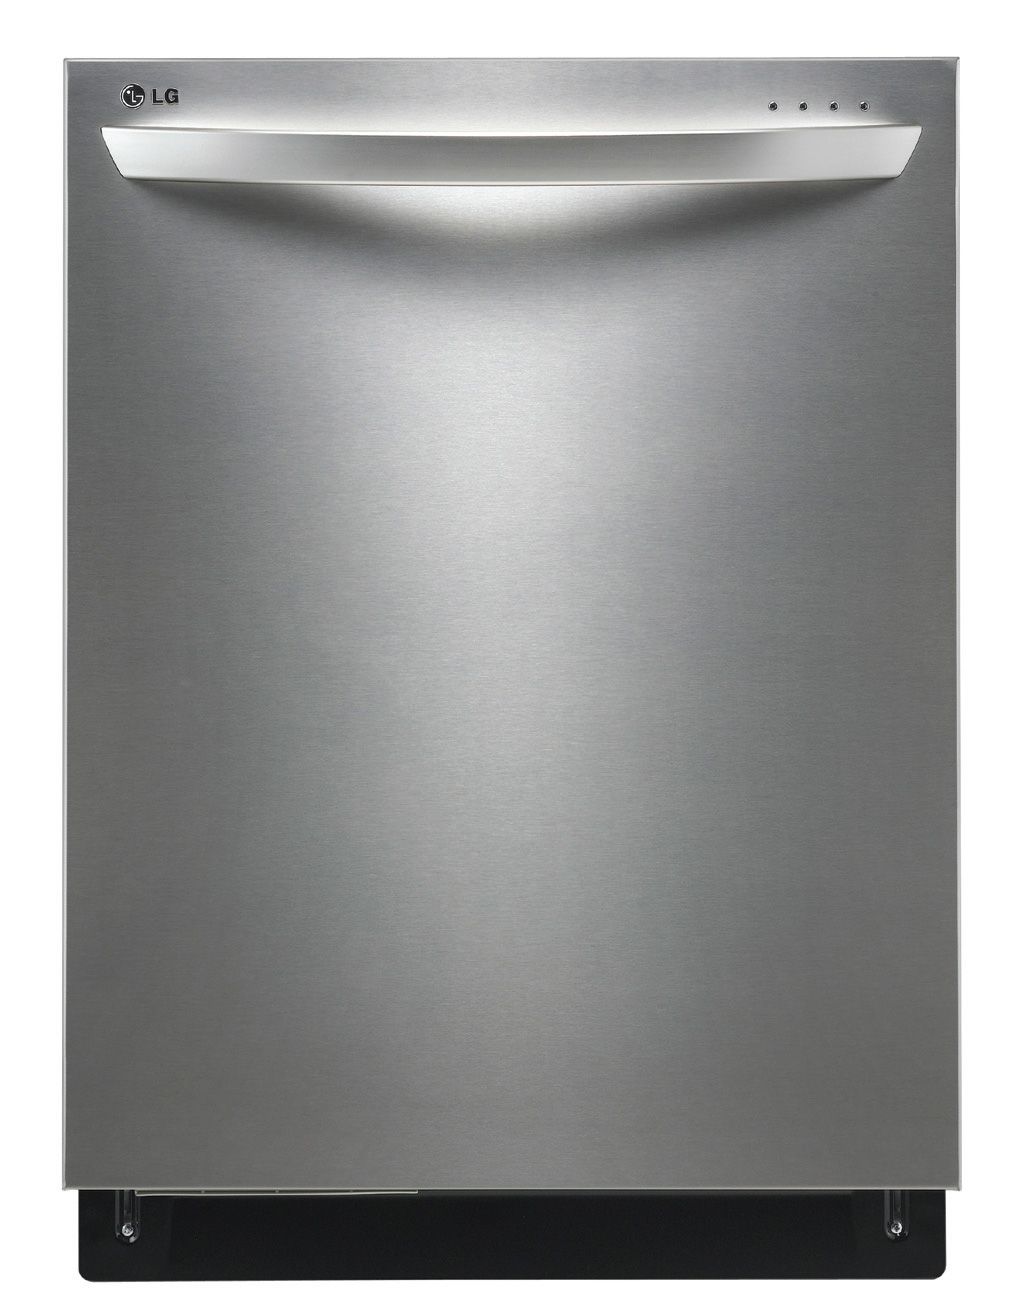 LG Fully Integrated Dishwasher Stainless Steel 14 settings, 7 cycles